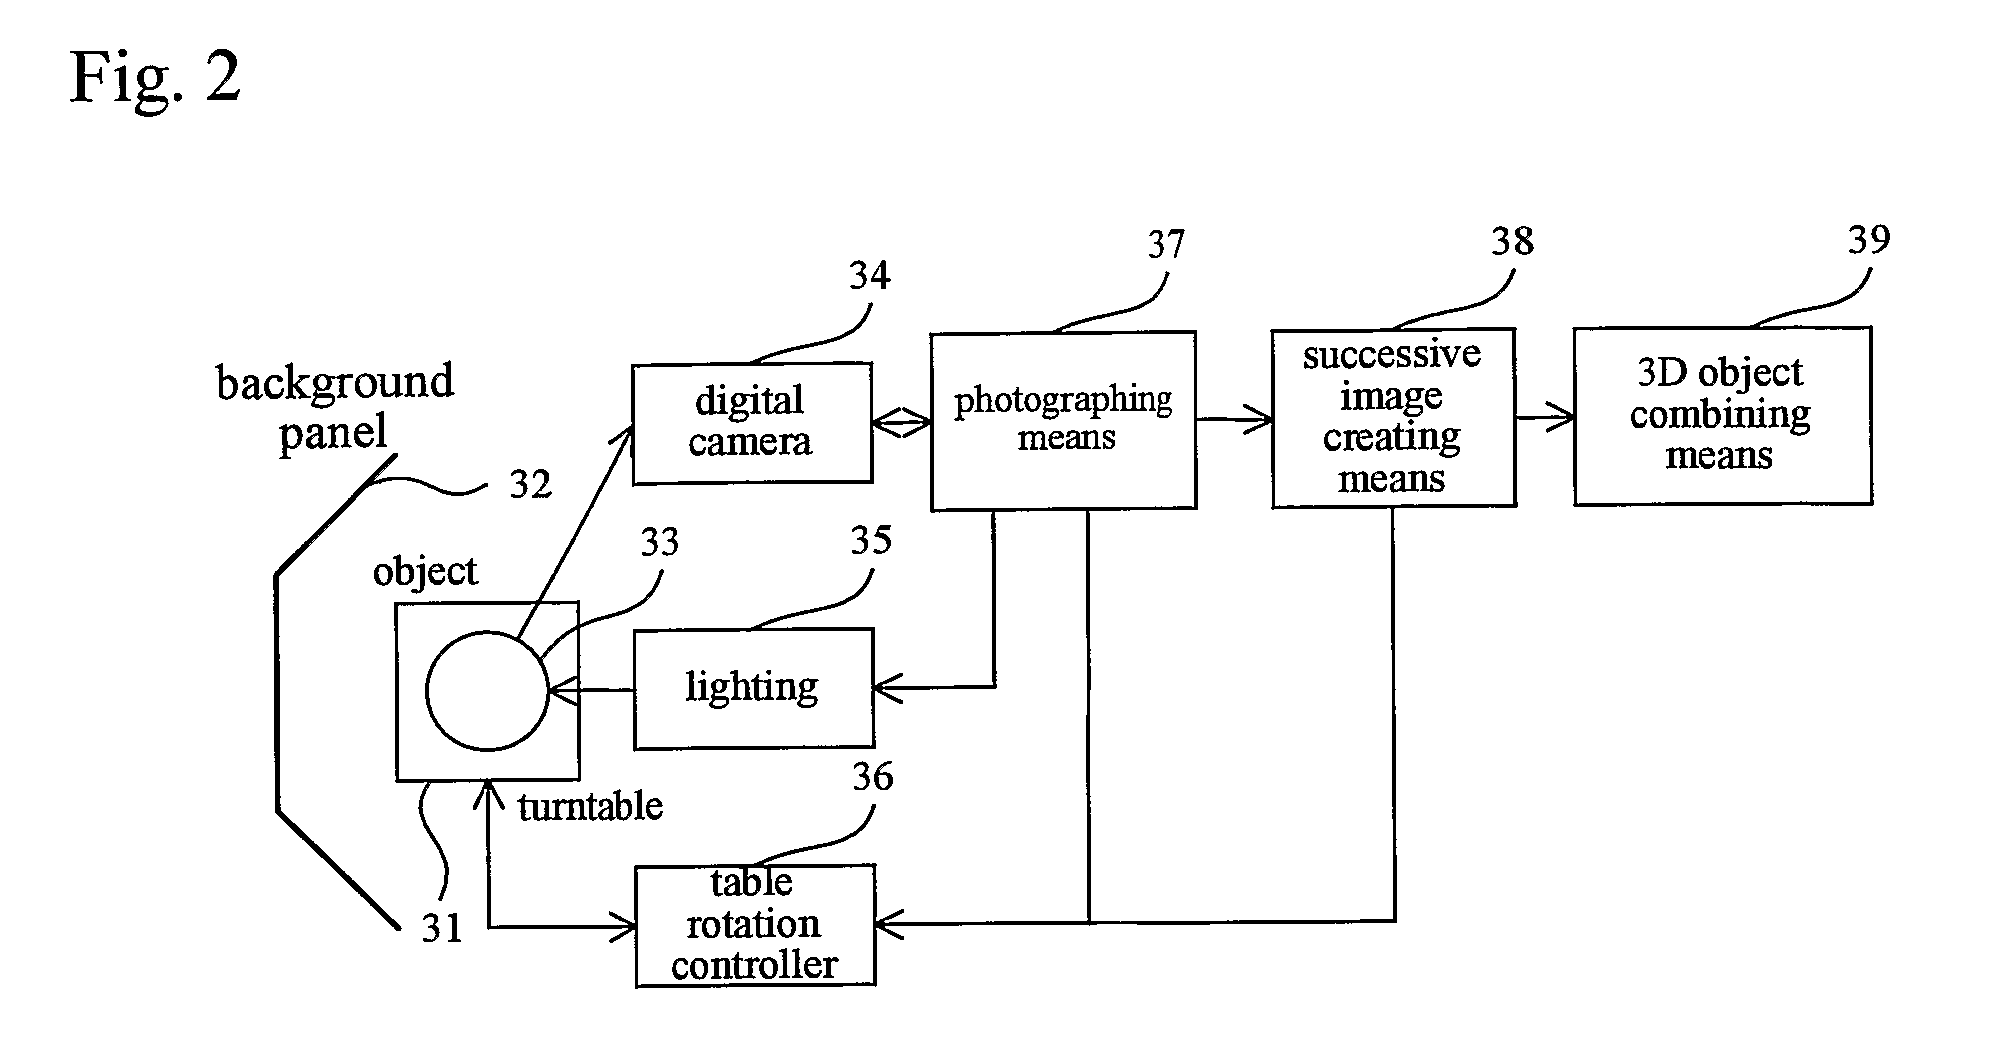 3D Image Generation and Display System